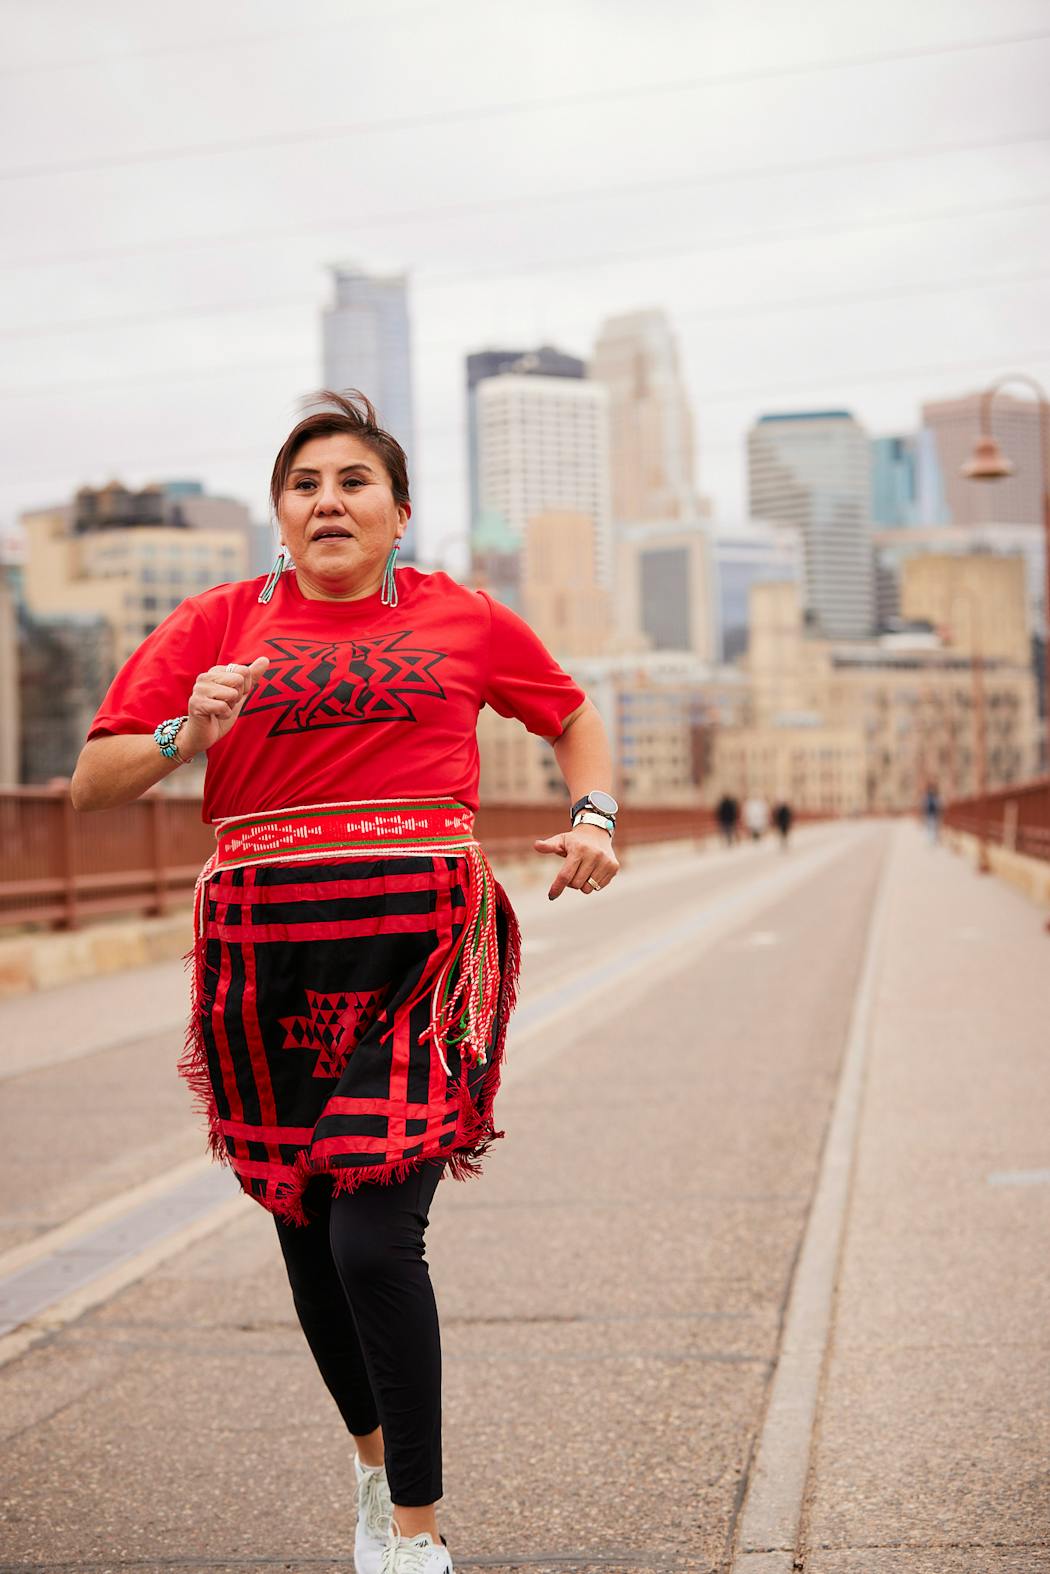 Verna Volker created Native Women Running when she couldn’t find other runners who looked like her